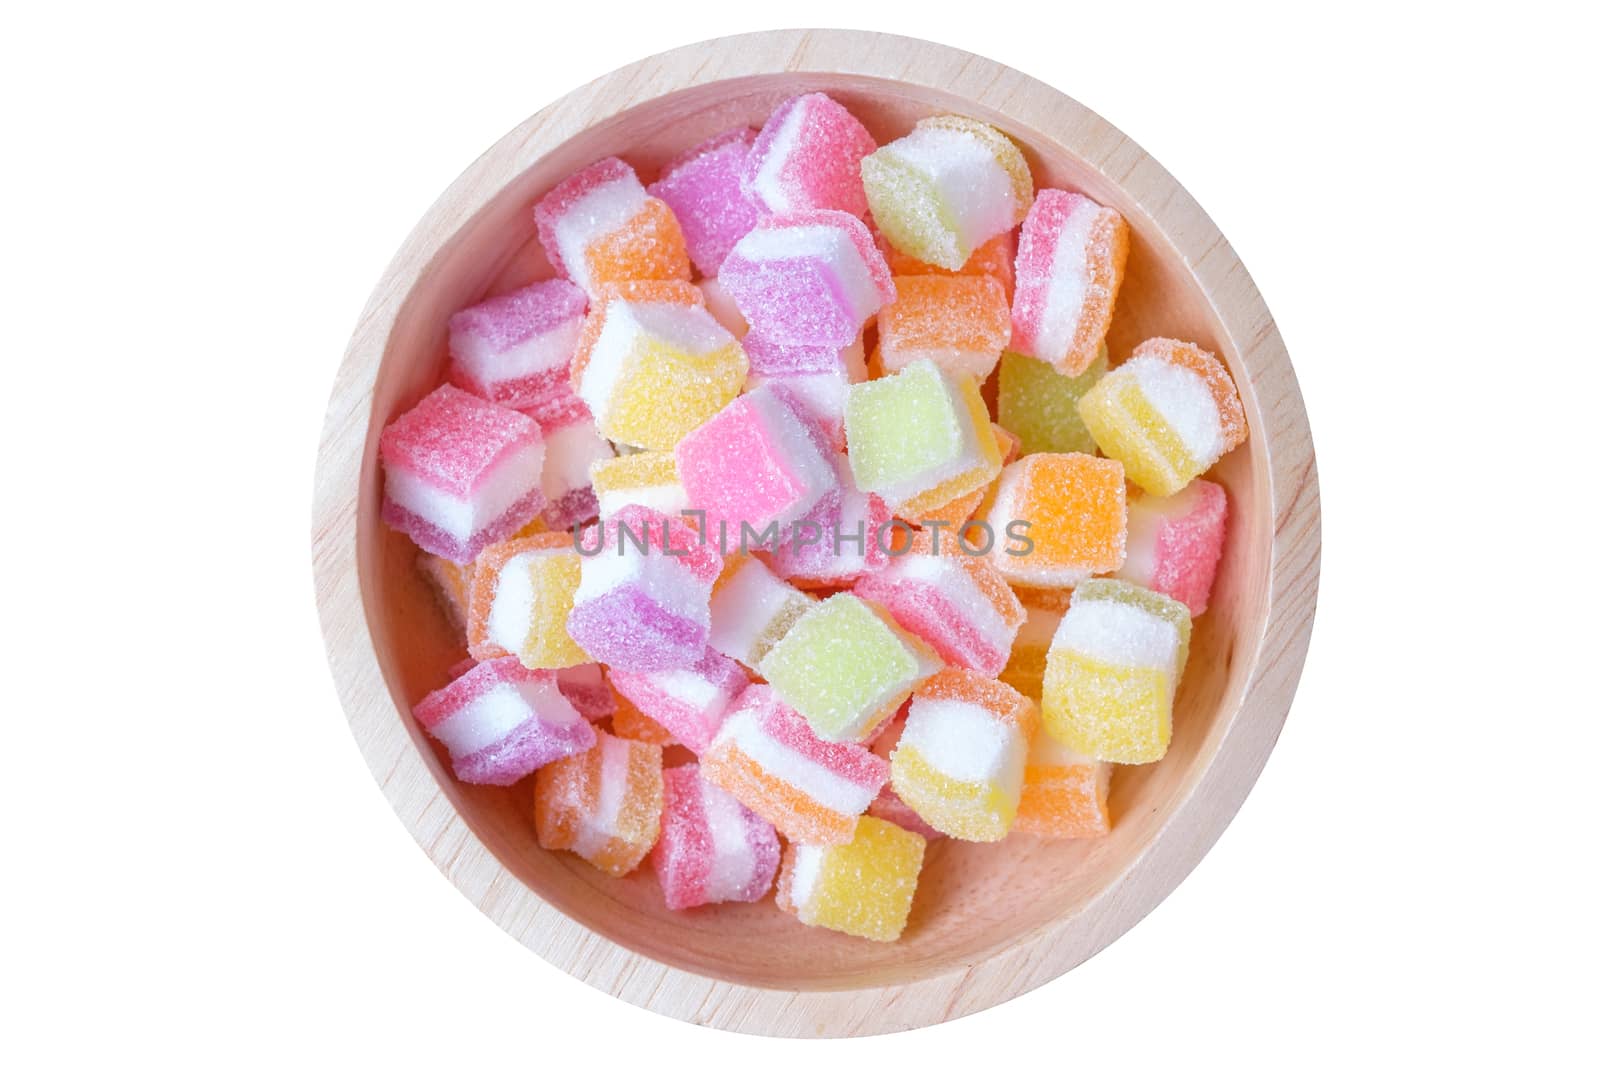 Colorful jelly in wooden bowl, isolate white background.